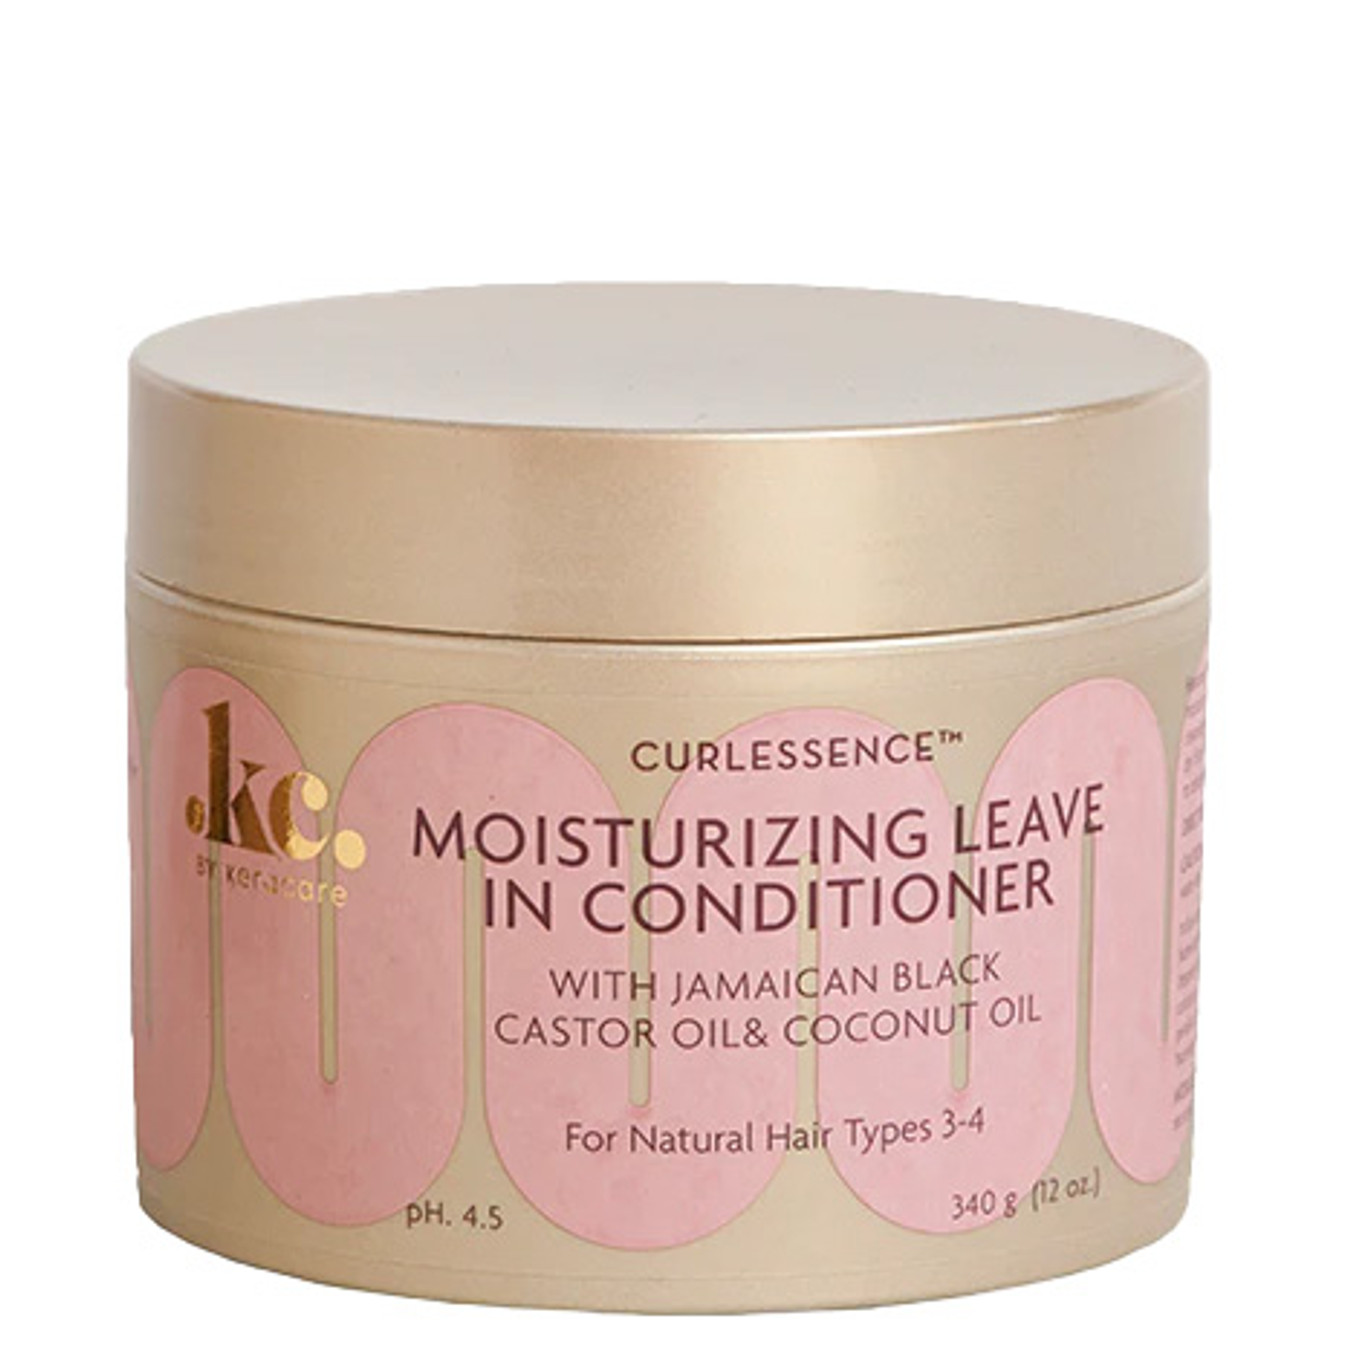 KeraCare Curlessence Moisturizing Leave In Conditioner (12 oz)